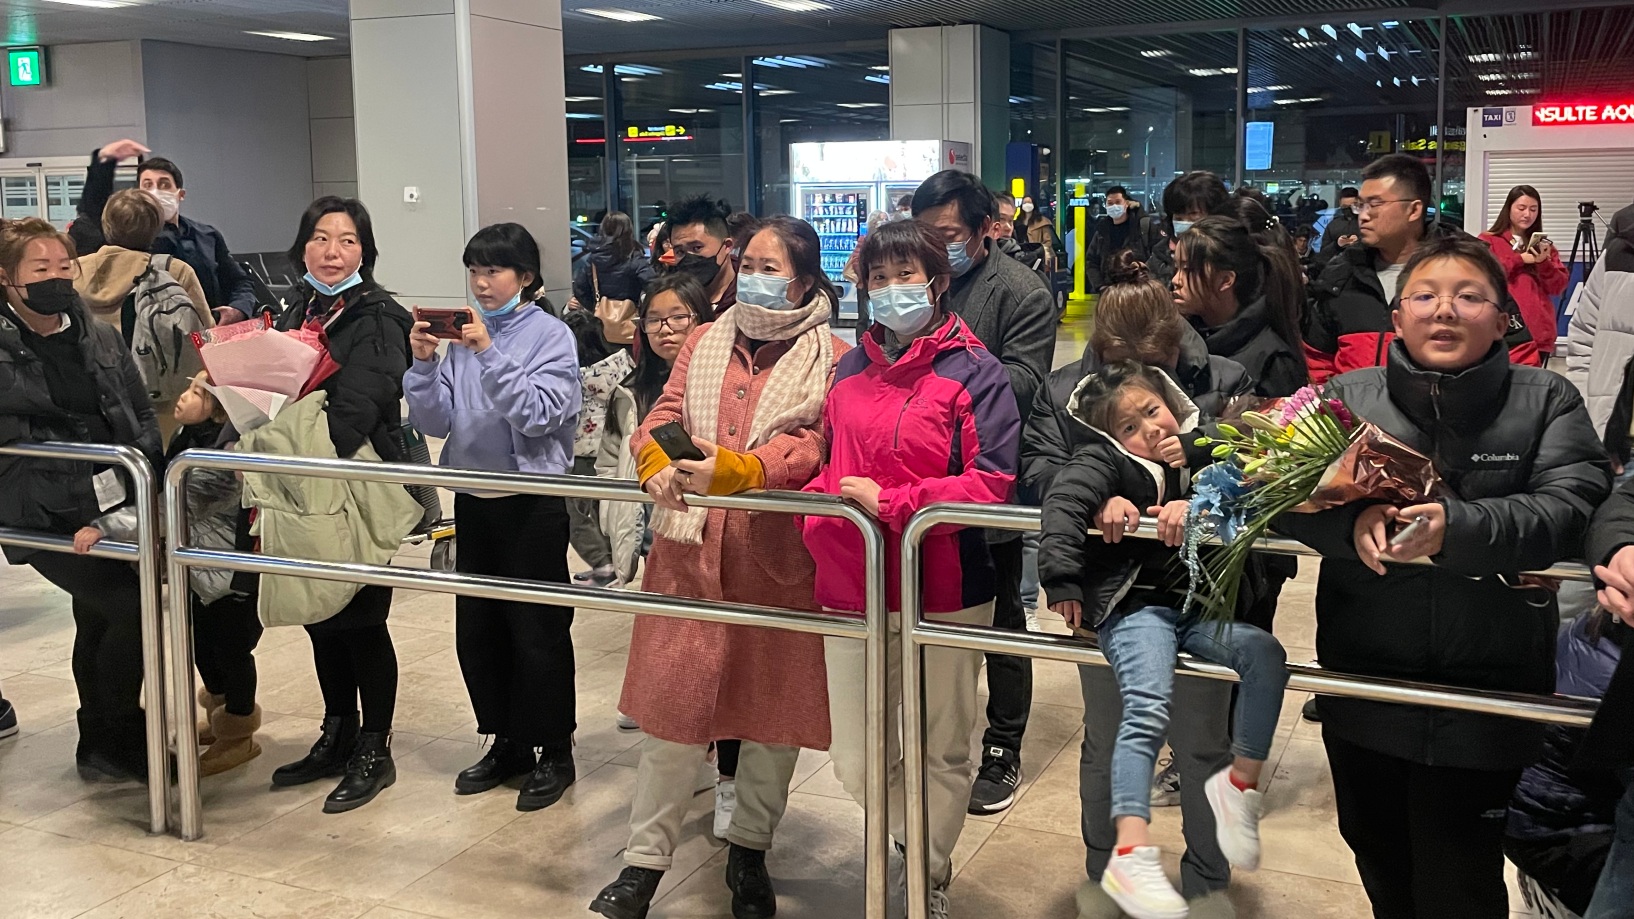 Madrid airport awaiting new arrivals from China. /CGTN